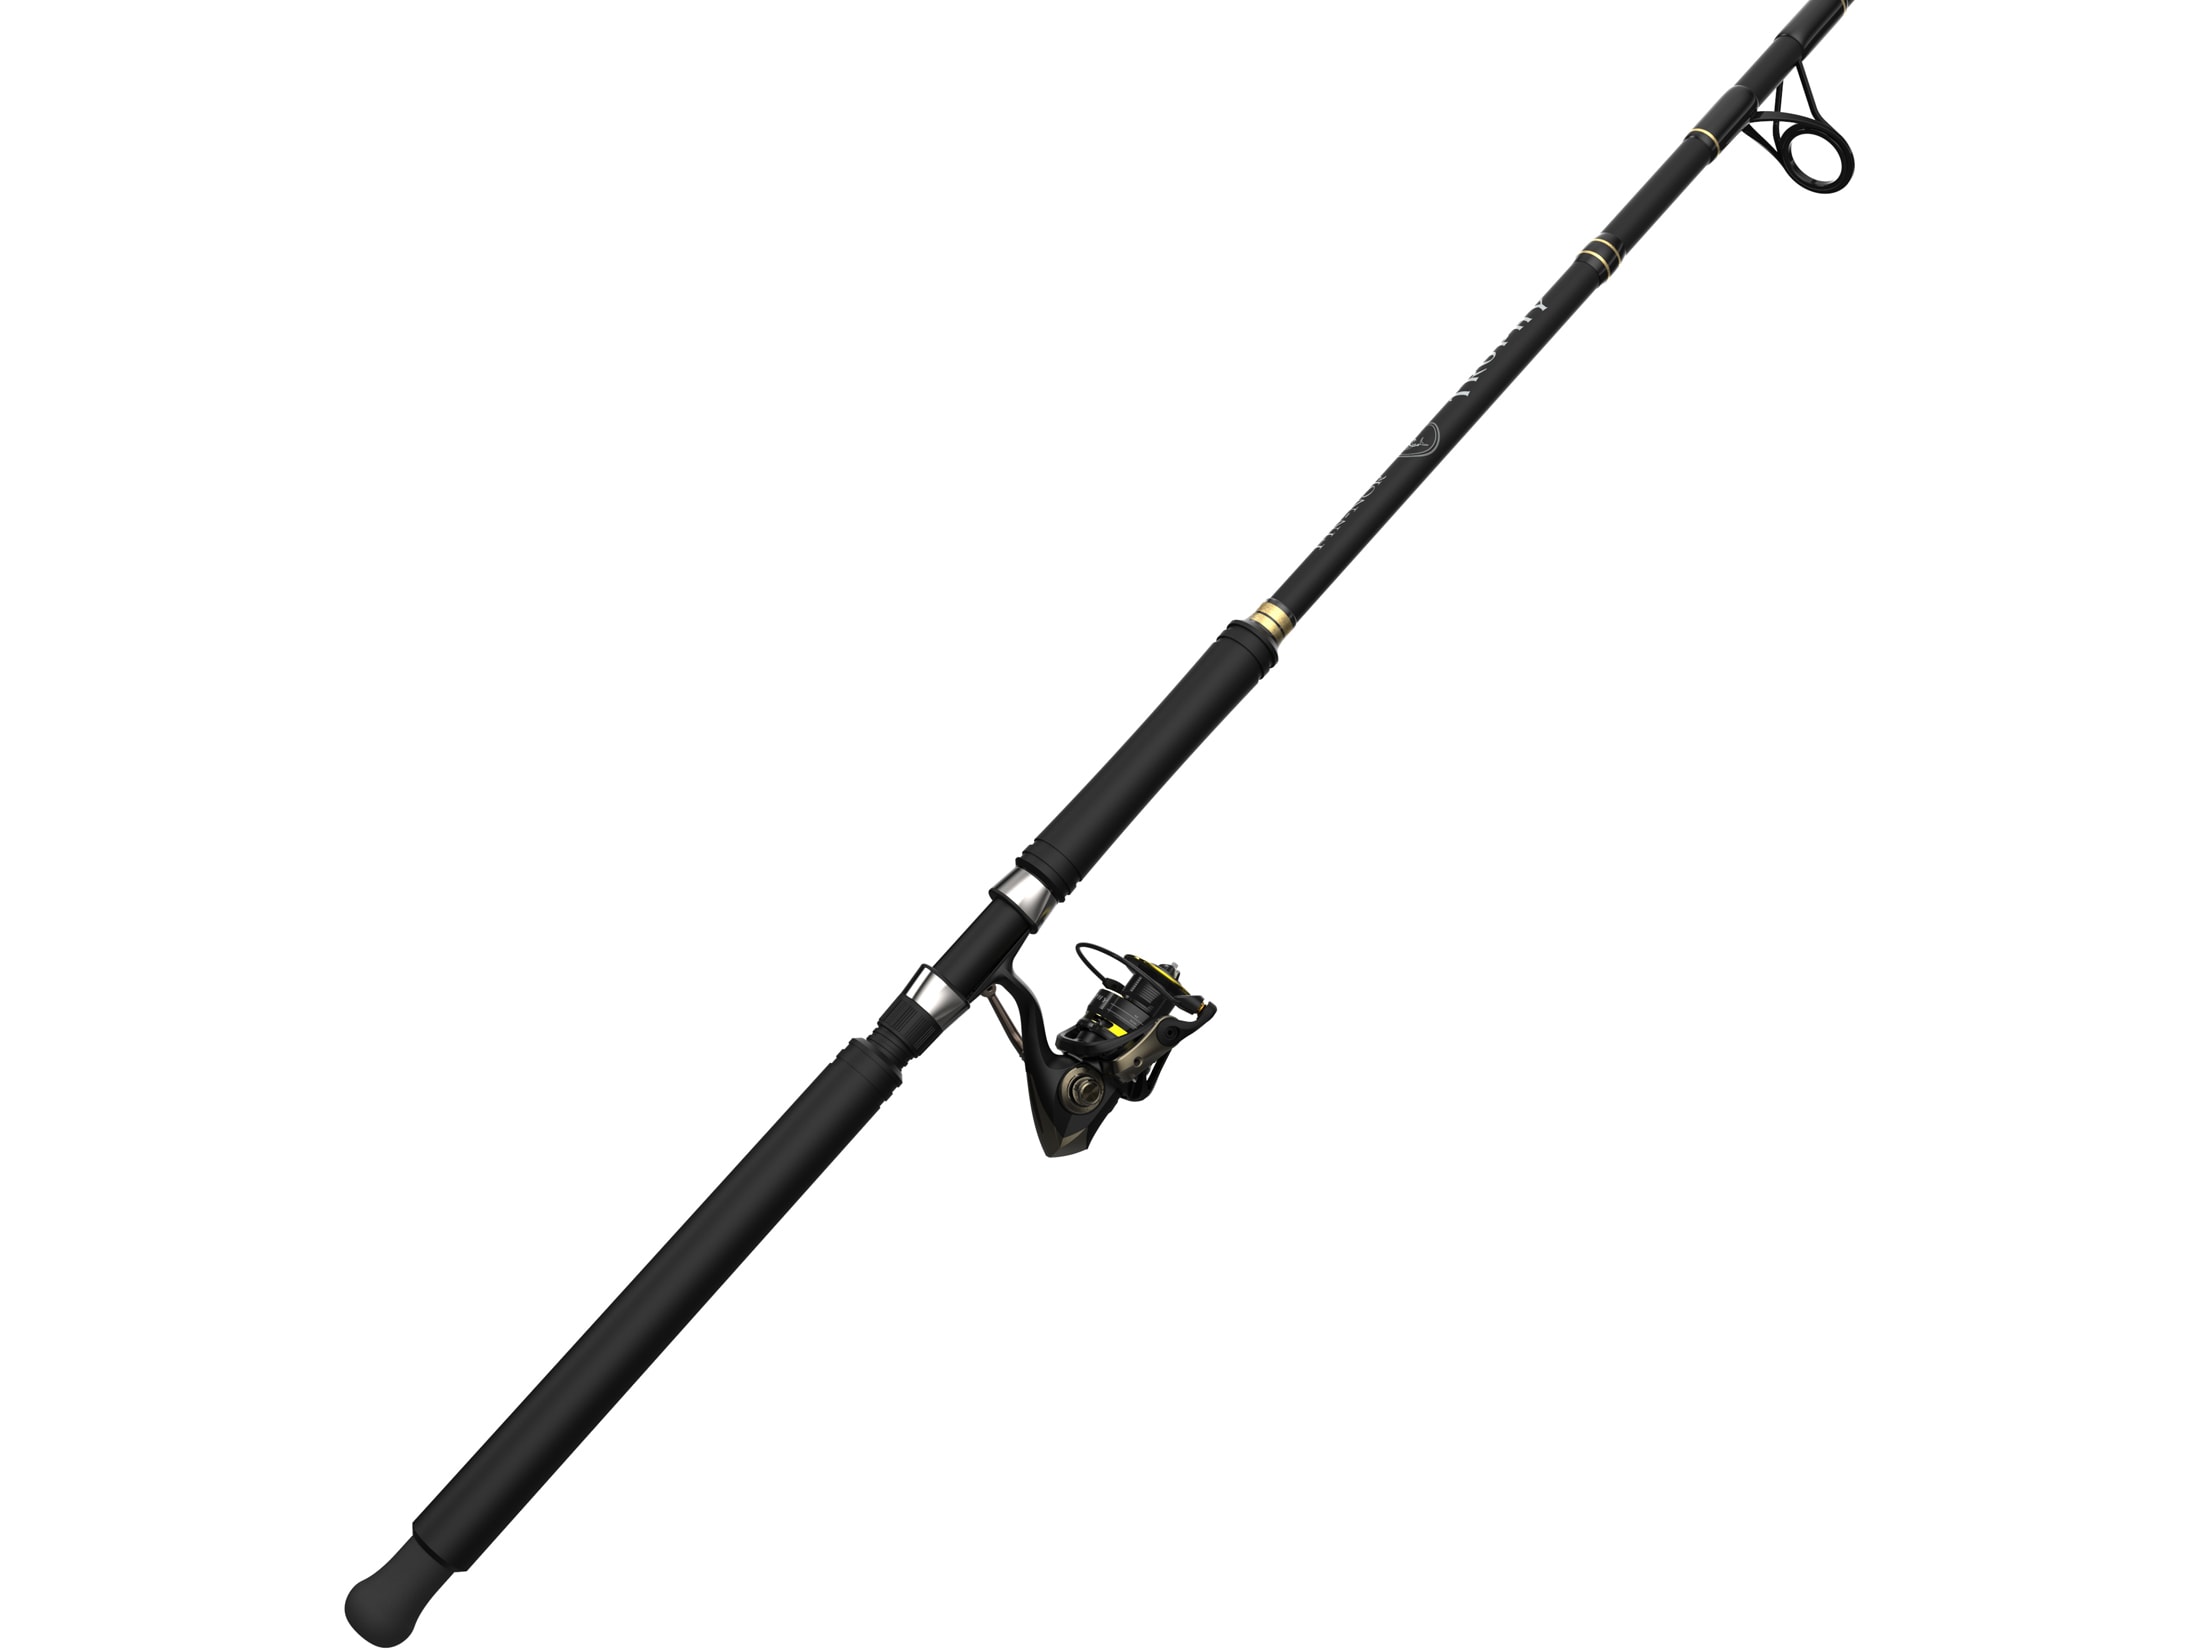 Fin-Nor Trophy 80 Spinning Combo